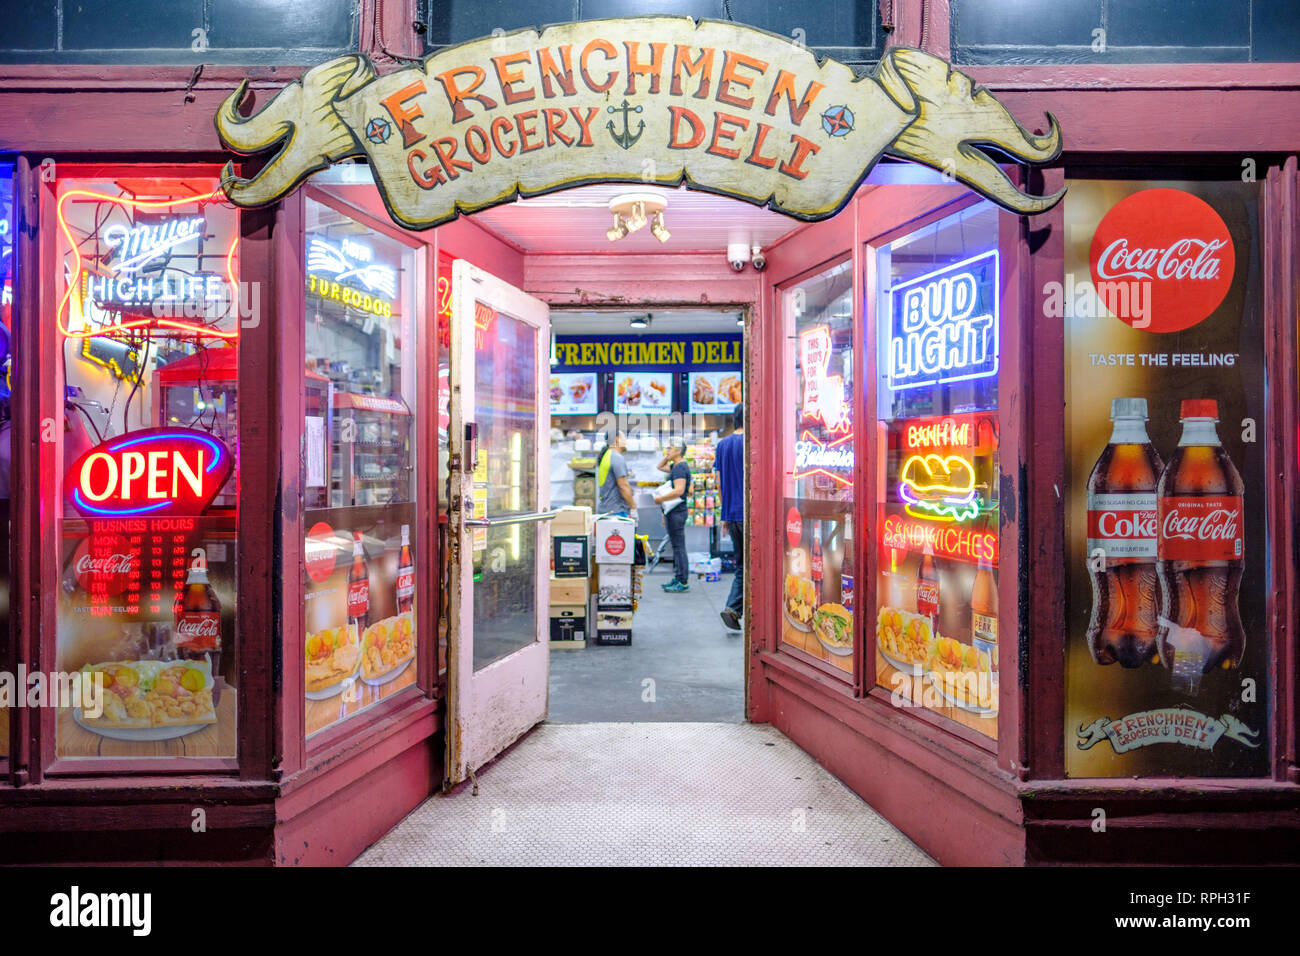 Frenchmen Grocery & Deli, Frenchmen Grocery and Deli Storefront, Frenchmen Street, New Orleans French Quarter, Marigny, New Orleans, Louisiana, USA Stockfoto